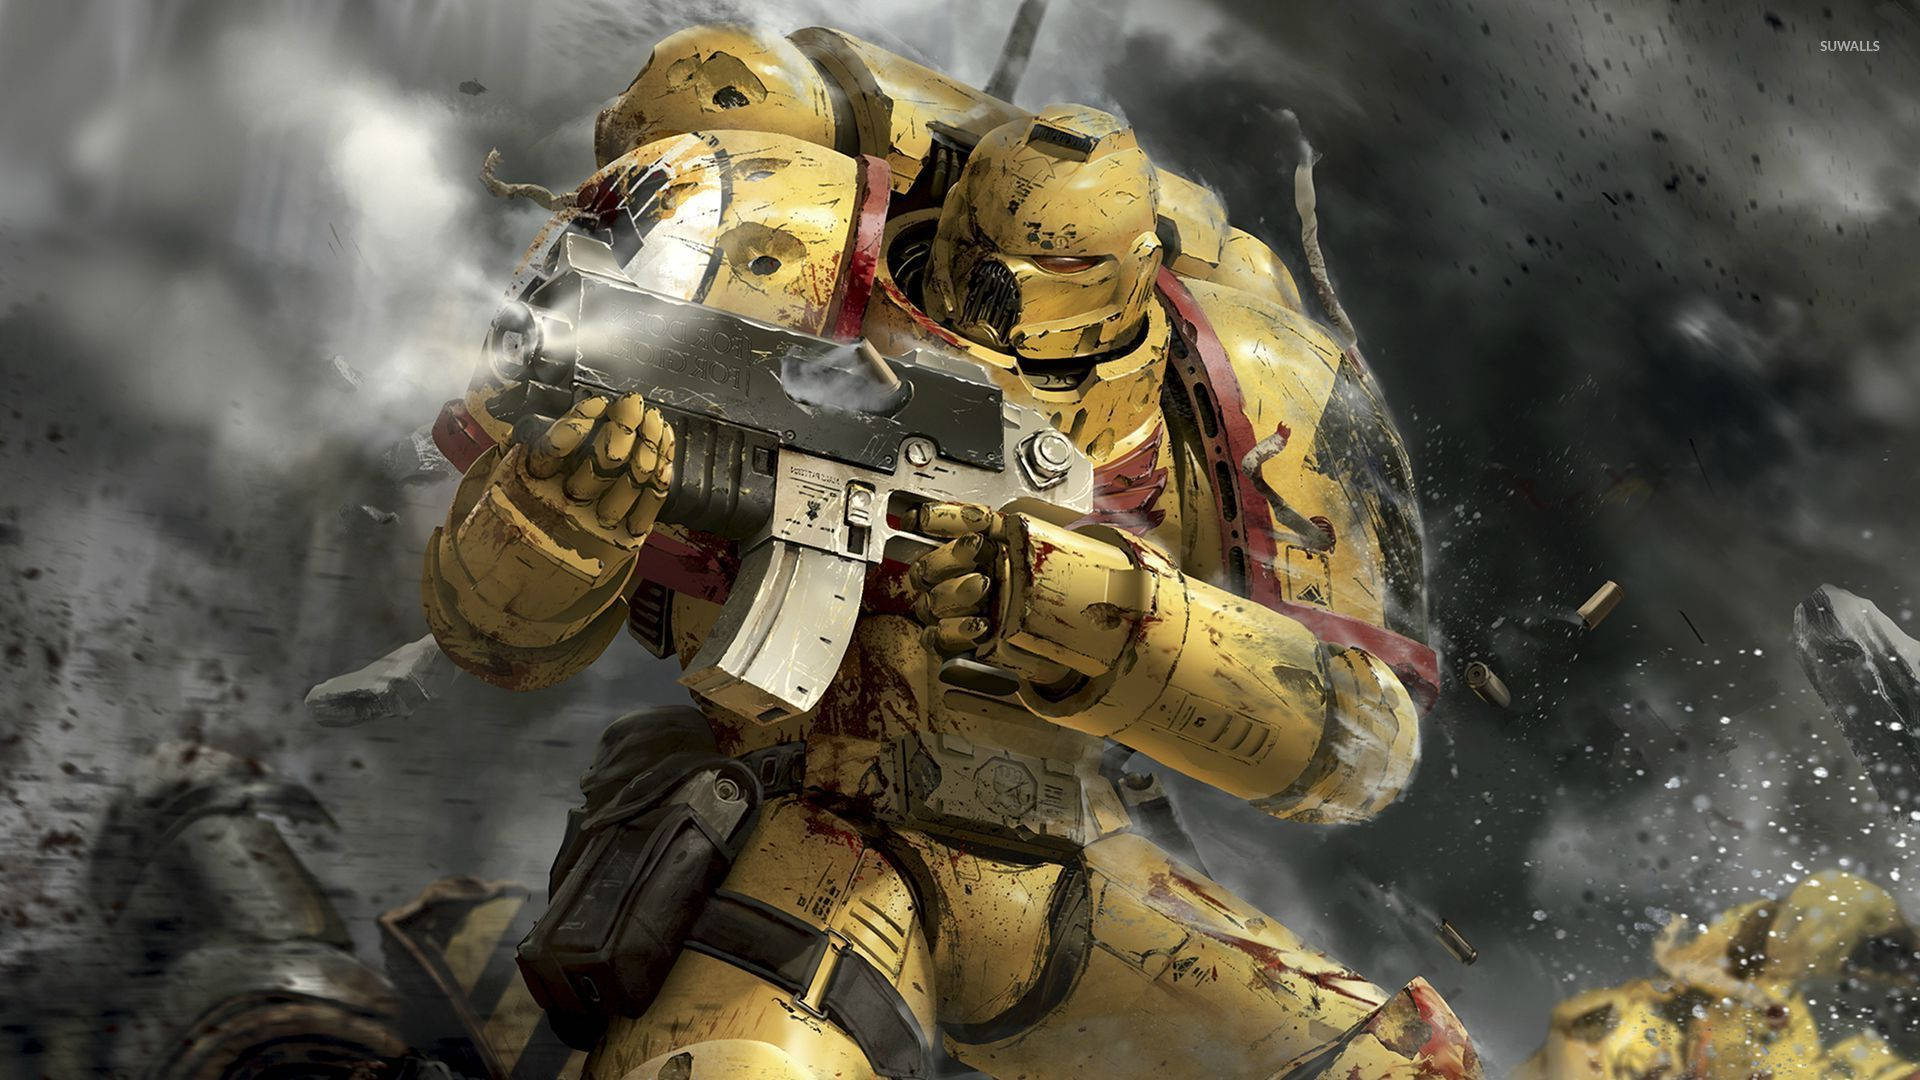 Imperial Fists Space Marine Warhammer 40k Background